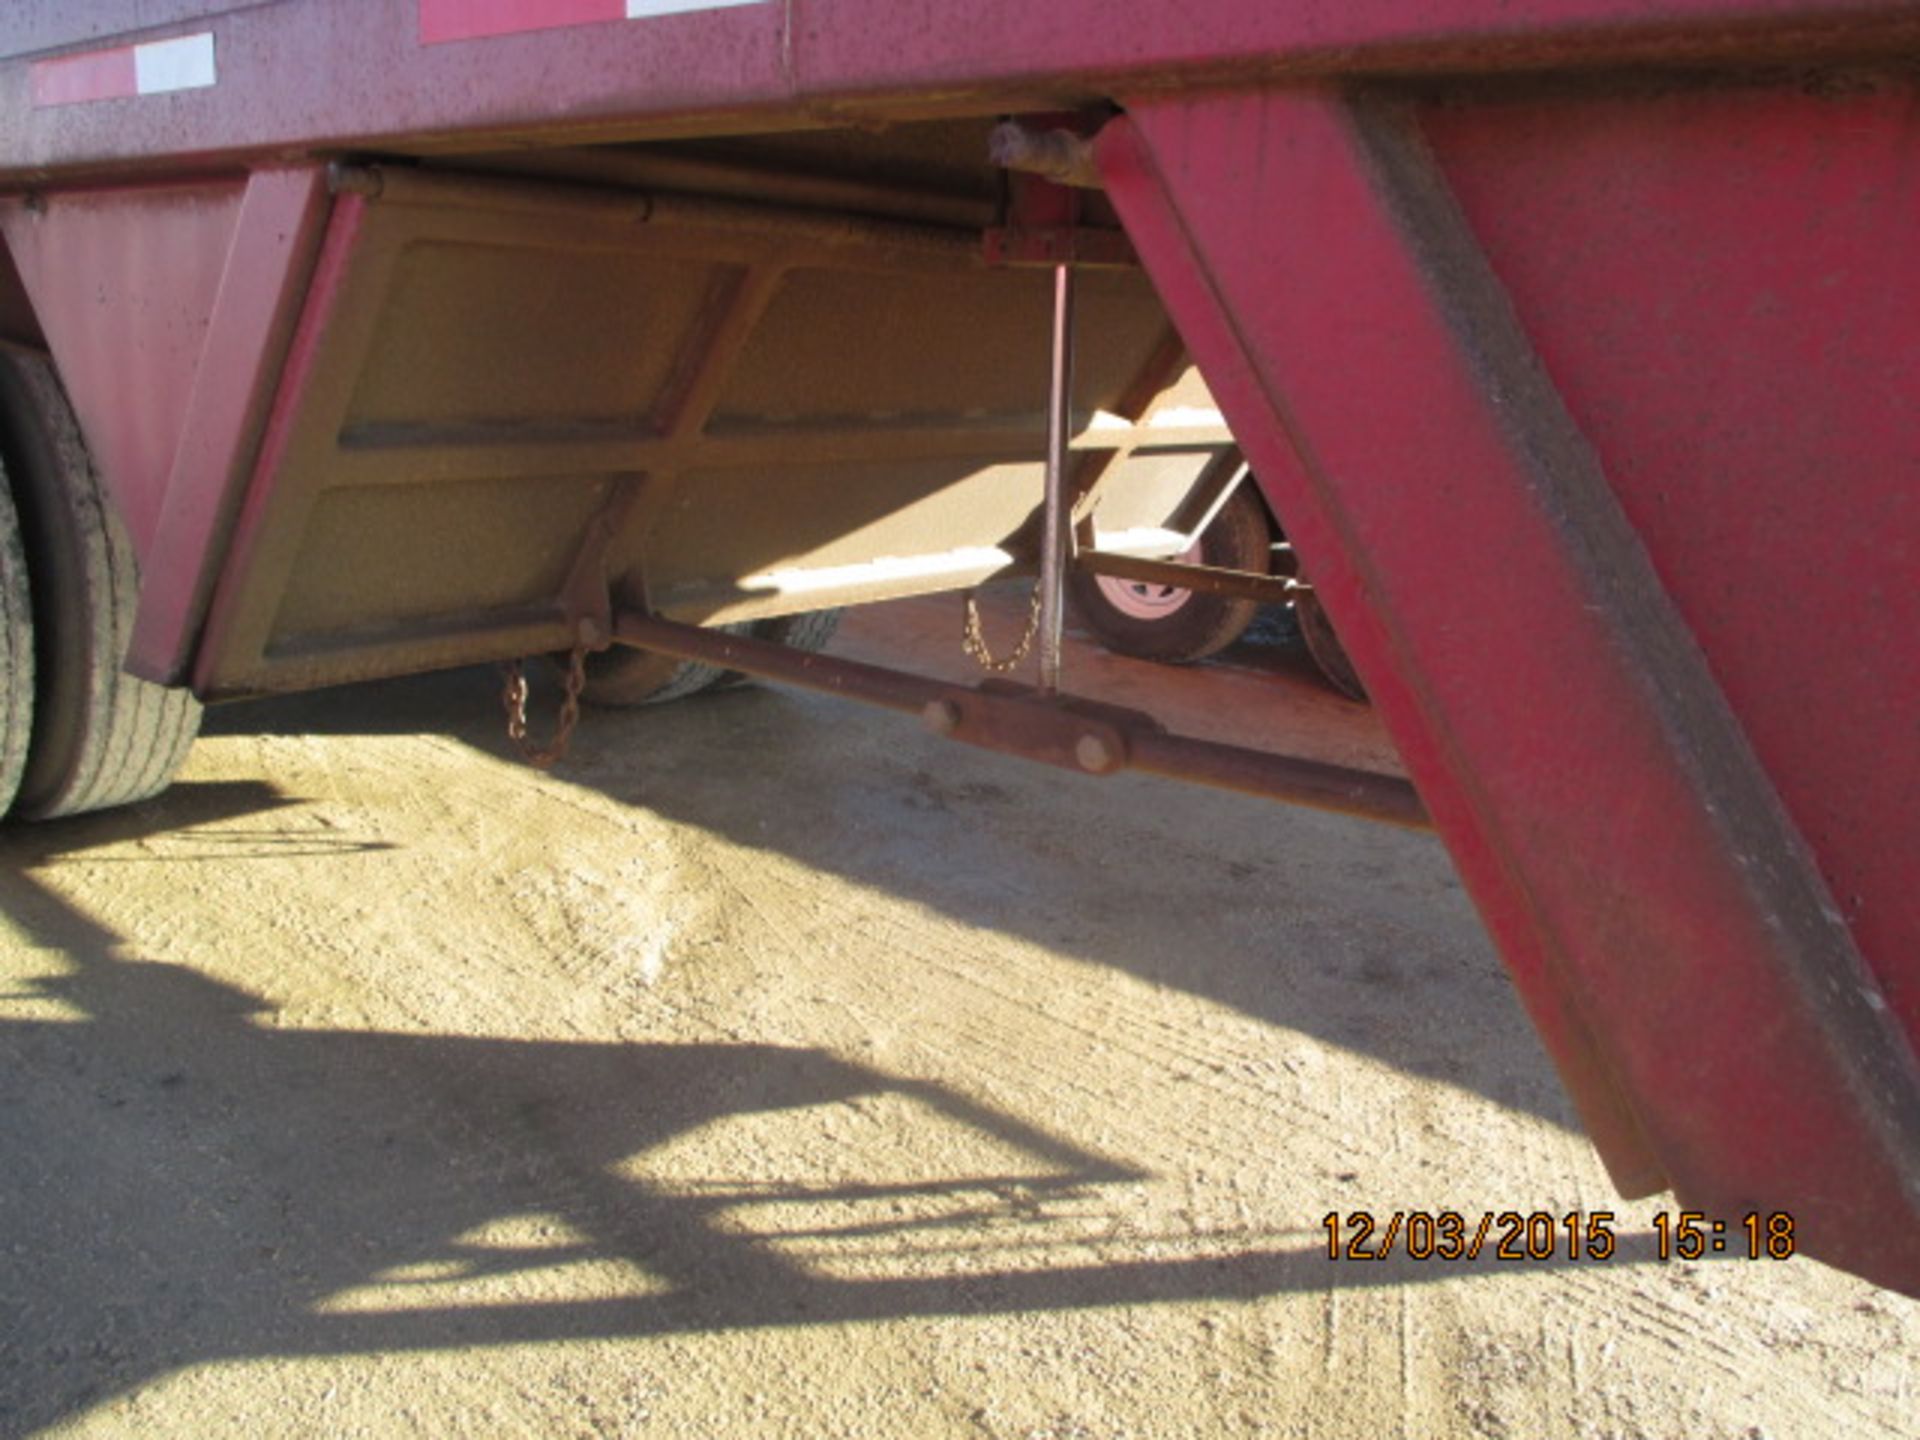 TITLE-Homemade tri-axle belly dump, missing VIN plate, unit BD-09 - Image 4 of 5